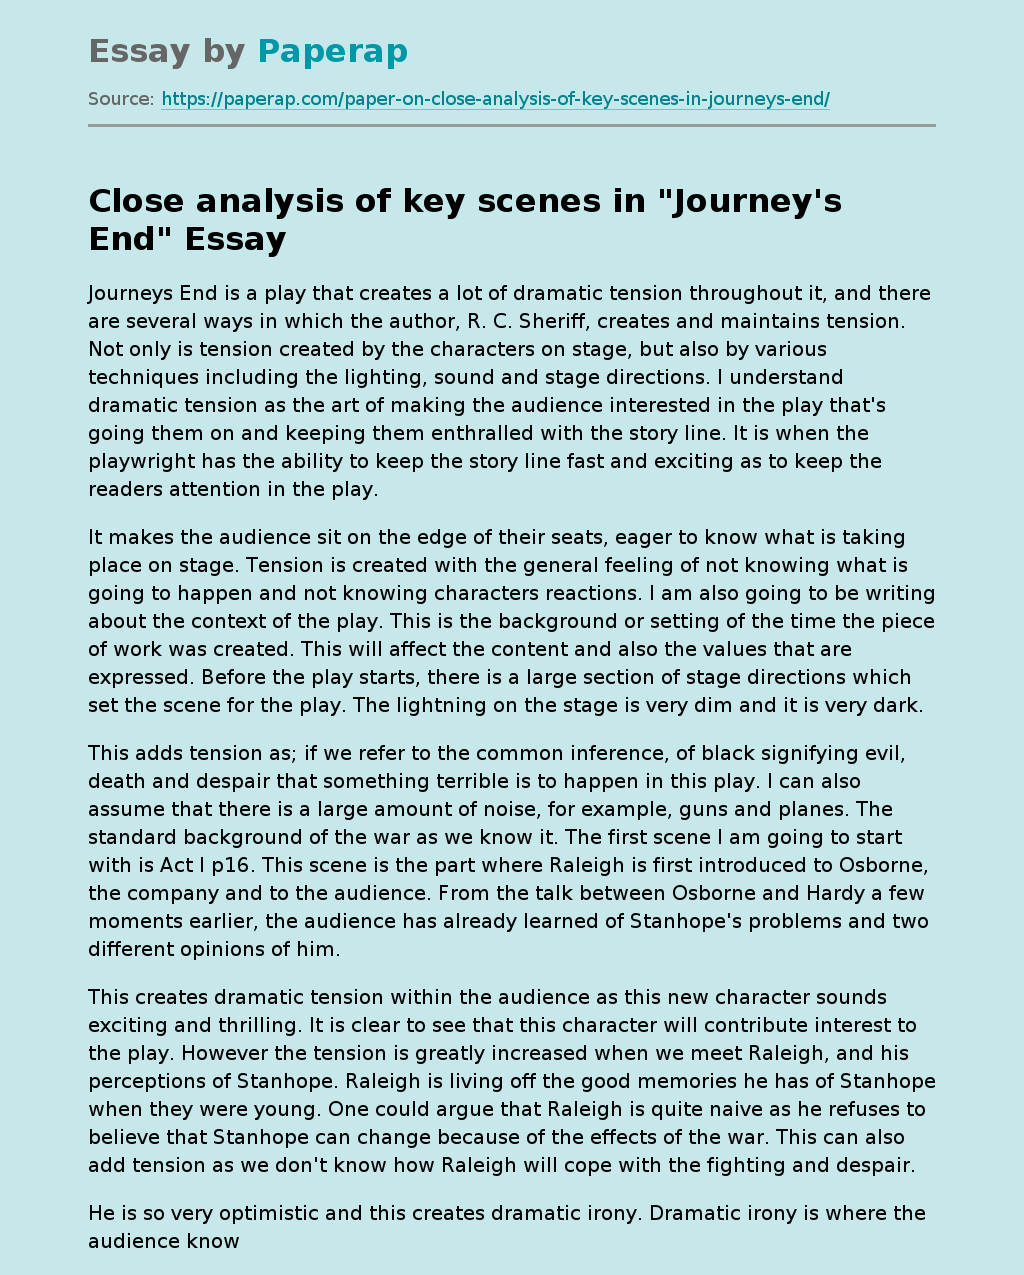 Close analysis of key scenes in "Journey's End"